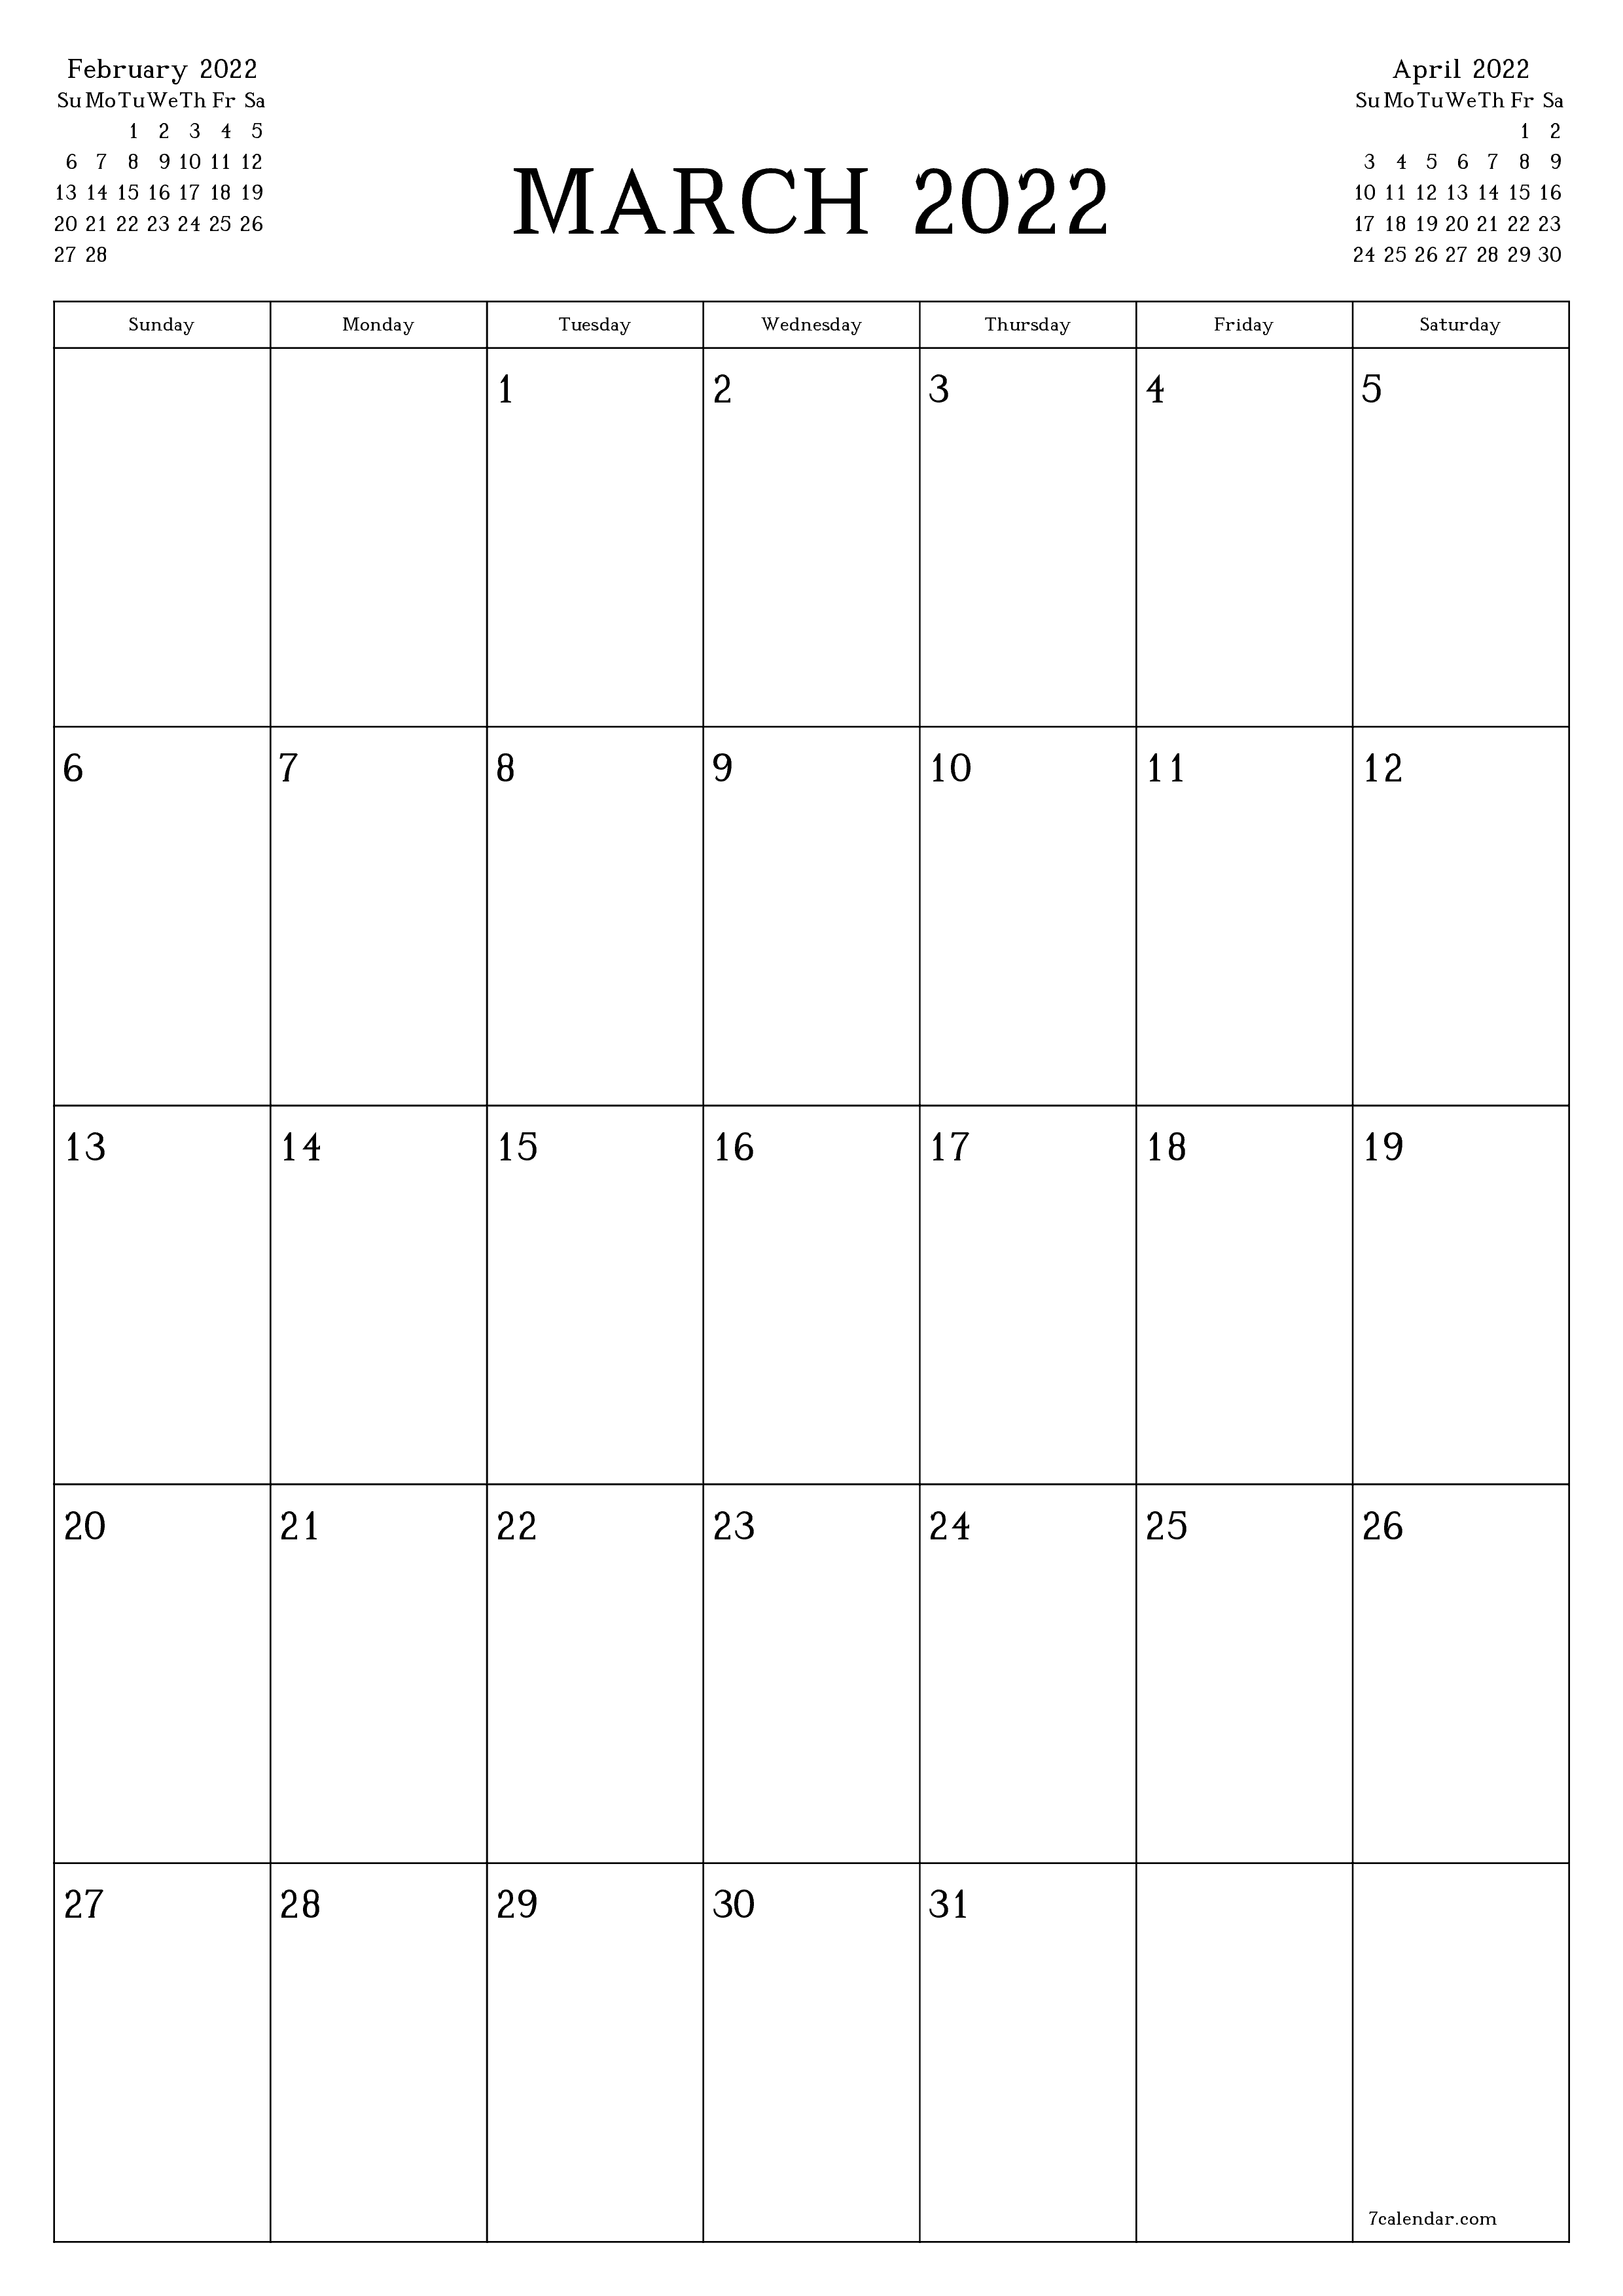 Blank monthly calendar planner for month March 2022 with notes save and print to PDF PNG English - 7calendar.com